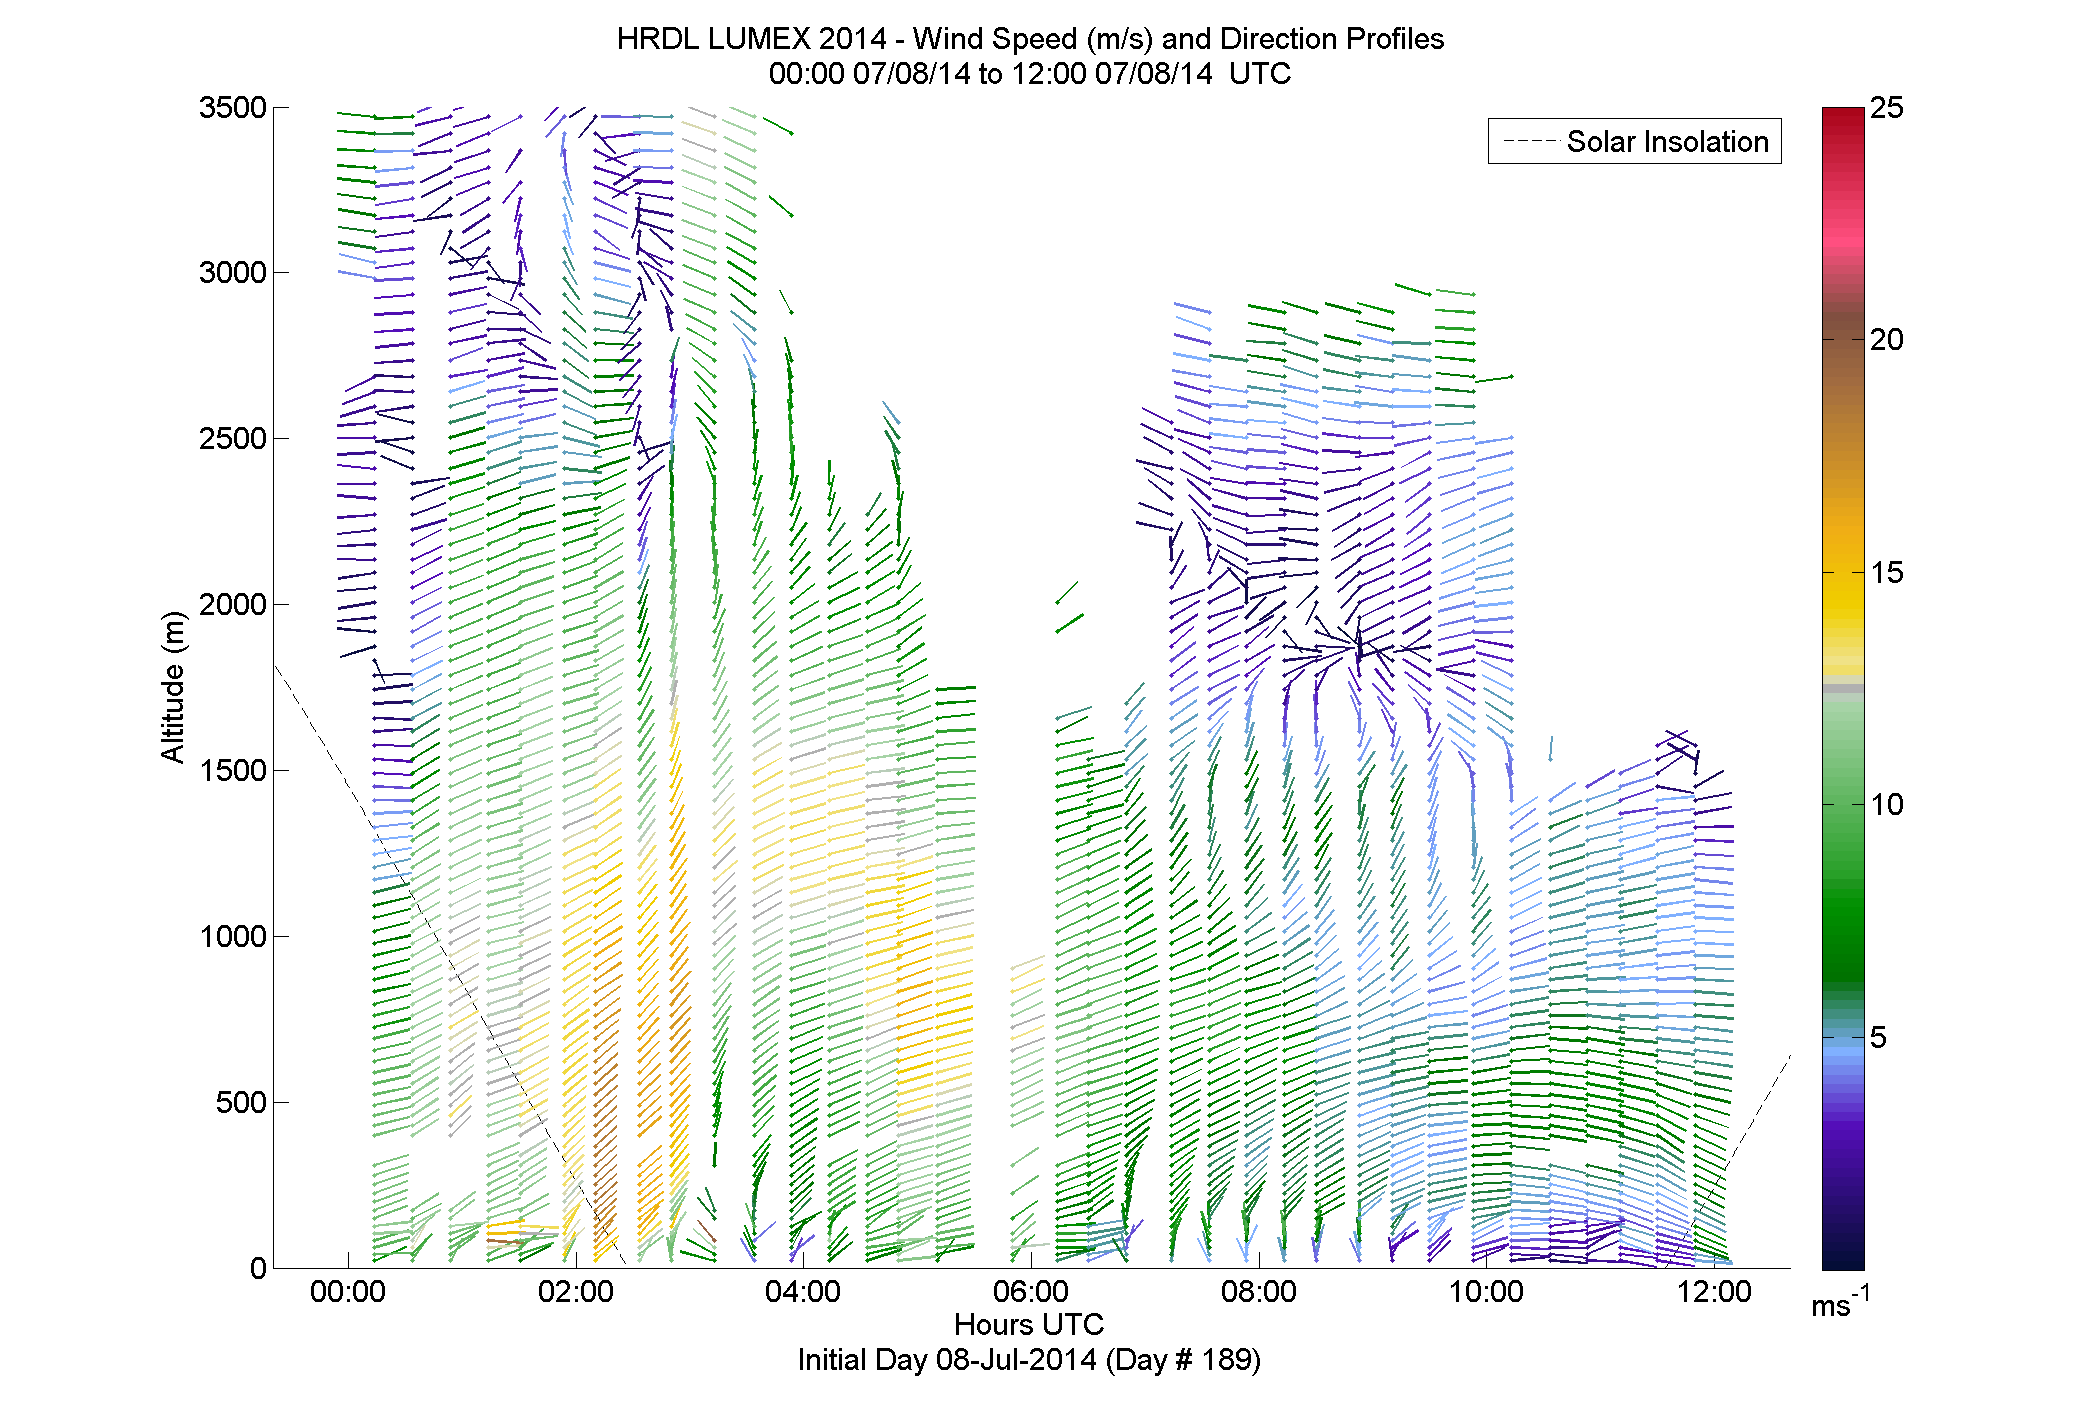 HRDL speed and direction profile - July 8 am